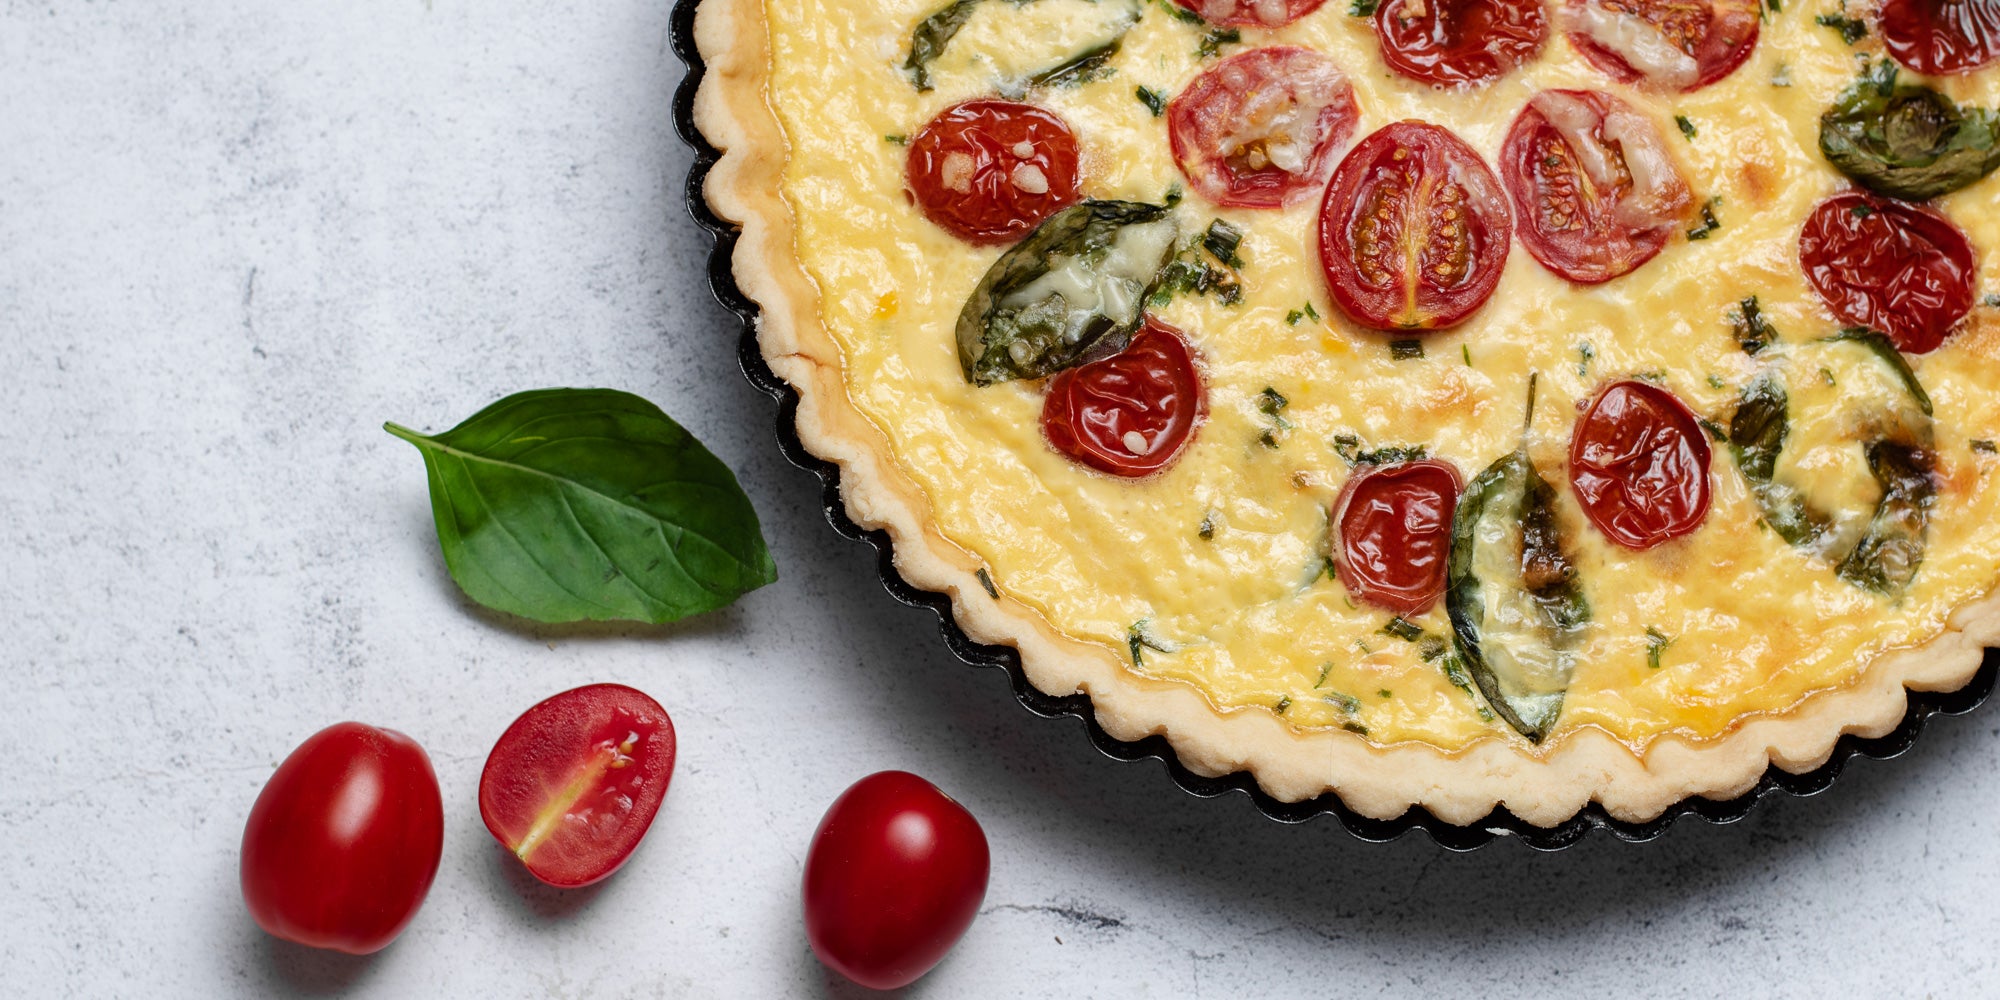 Close up of a Cheese & Tomato Quiche with chopped tomatoes and a basil leaf